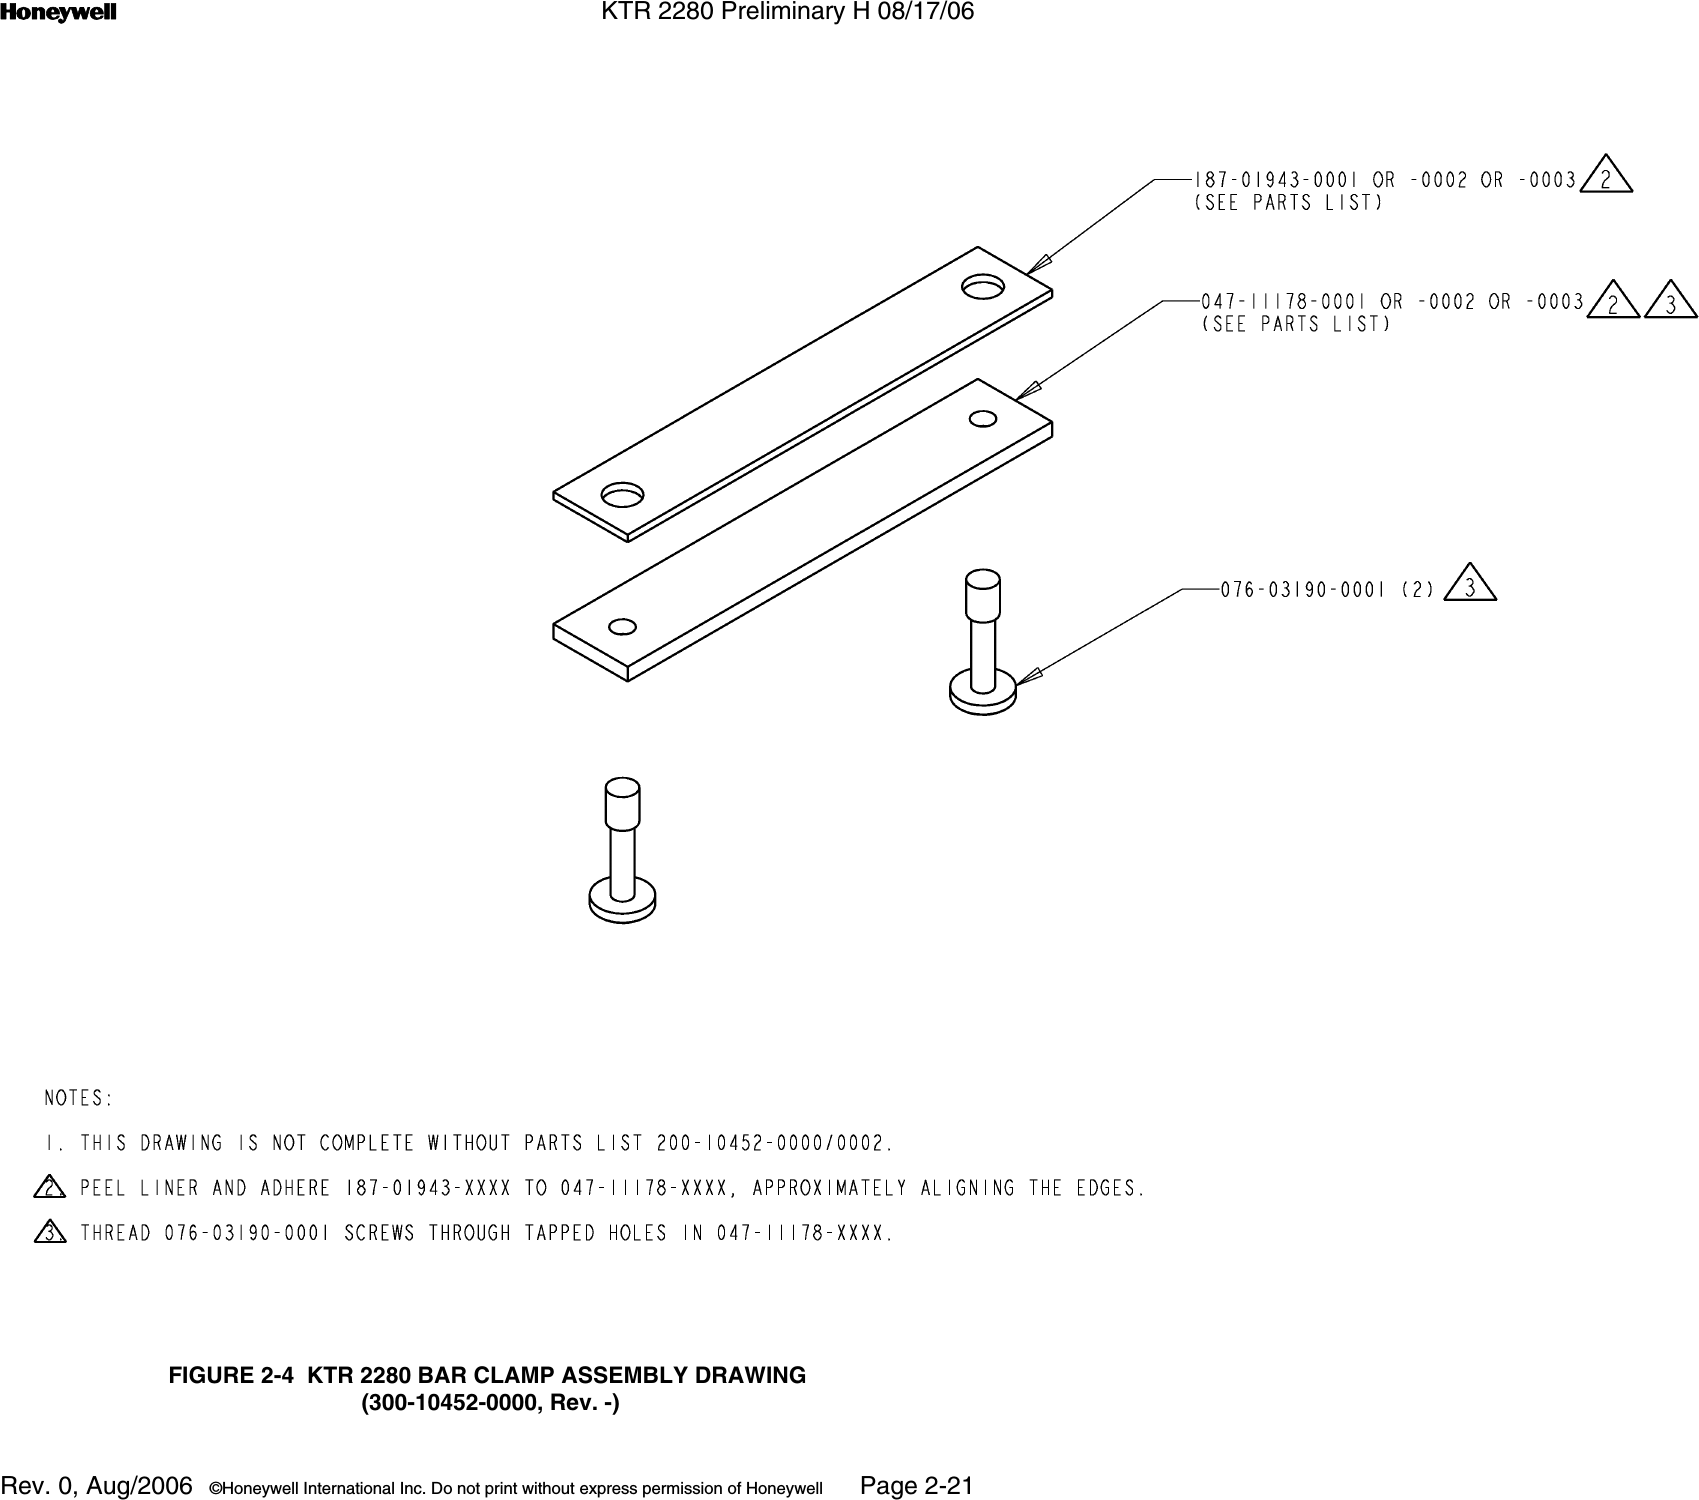 n KTR 2280 Preliminary H 08/17/06Rev. 0, Aug/2006  ©Honeywell International Inc. Do not print without express permission of Honeywell Page 2-21FIGURE 2-4  KTR 2280 BAR CLAMP ASSEMBLY DRAWING (300-10452-0000, Rev. -)